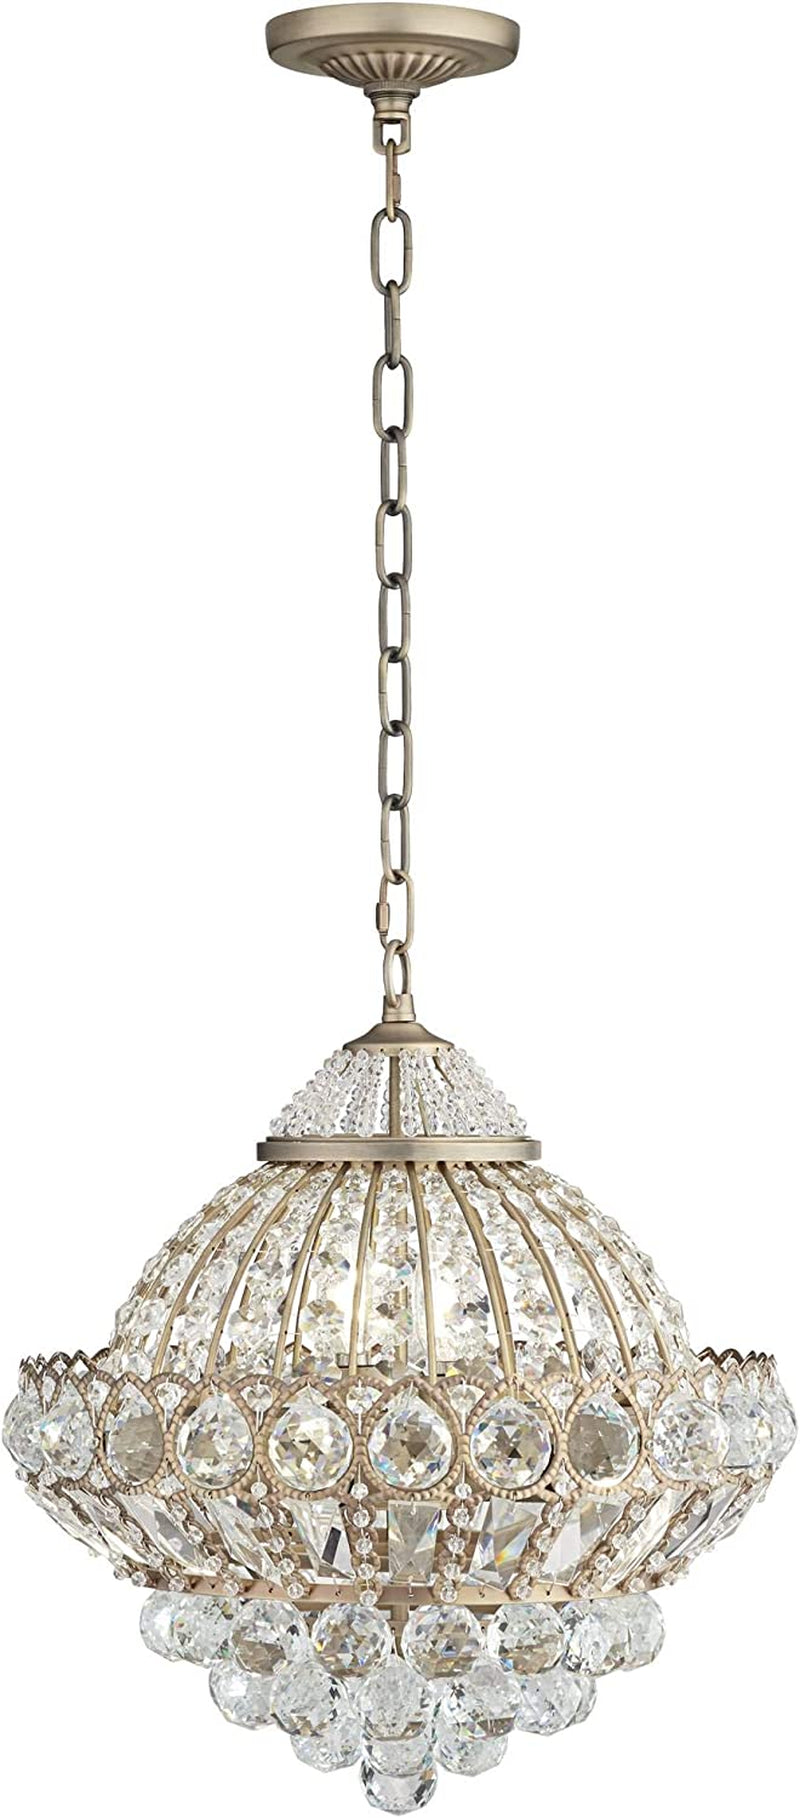 Wallingford Antique Brass Gold Chandelier Lighting 16" Wide Clear Crystal Shade 6-Light Fixture for Dining Room House Foyer Entryway Kitchen Bedroom Living Room High Ceilings - Vienna Full Spectrum Home & Garden > Lighting > Lighting Fixtures > Chandeliers Vienna Full Spectrum   